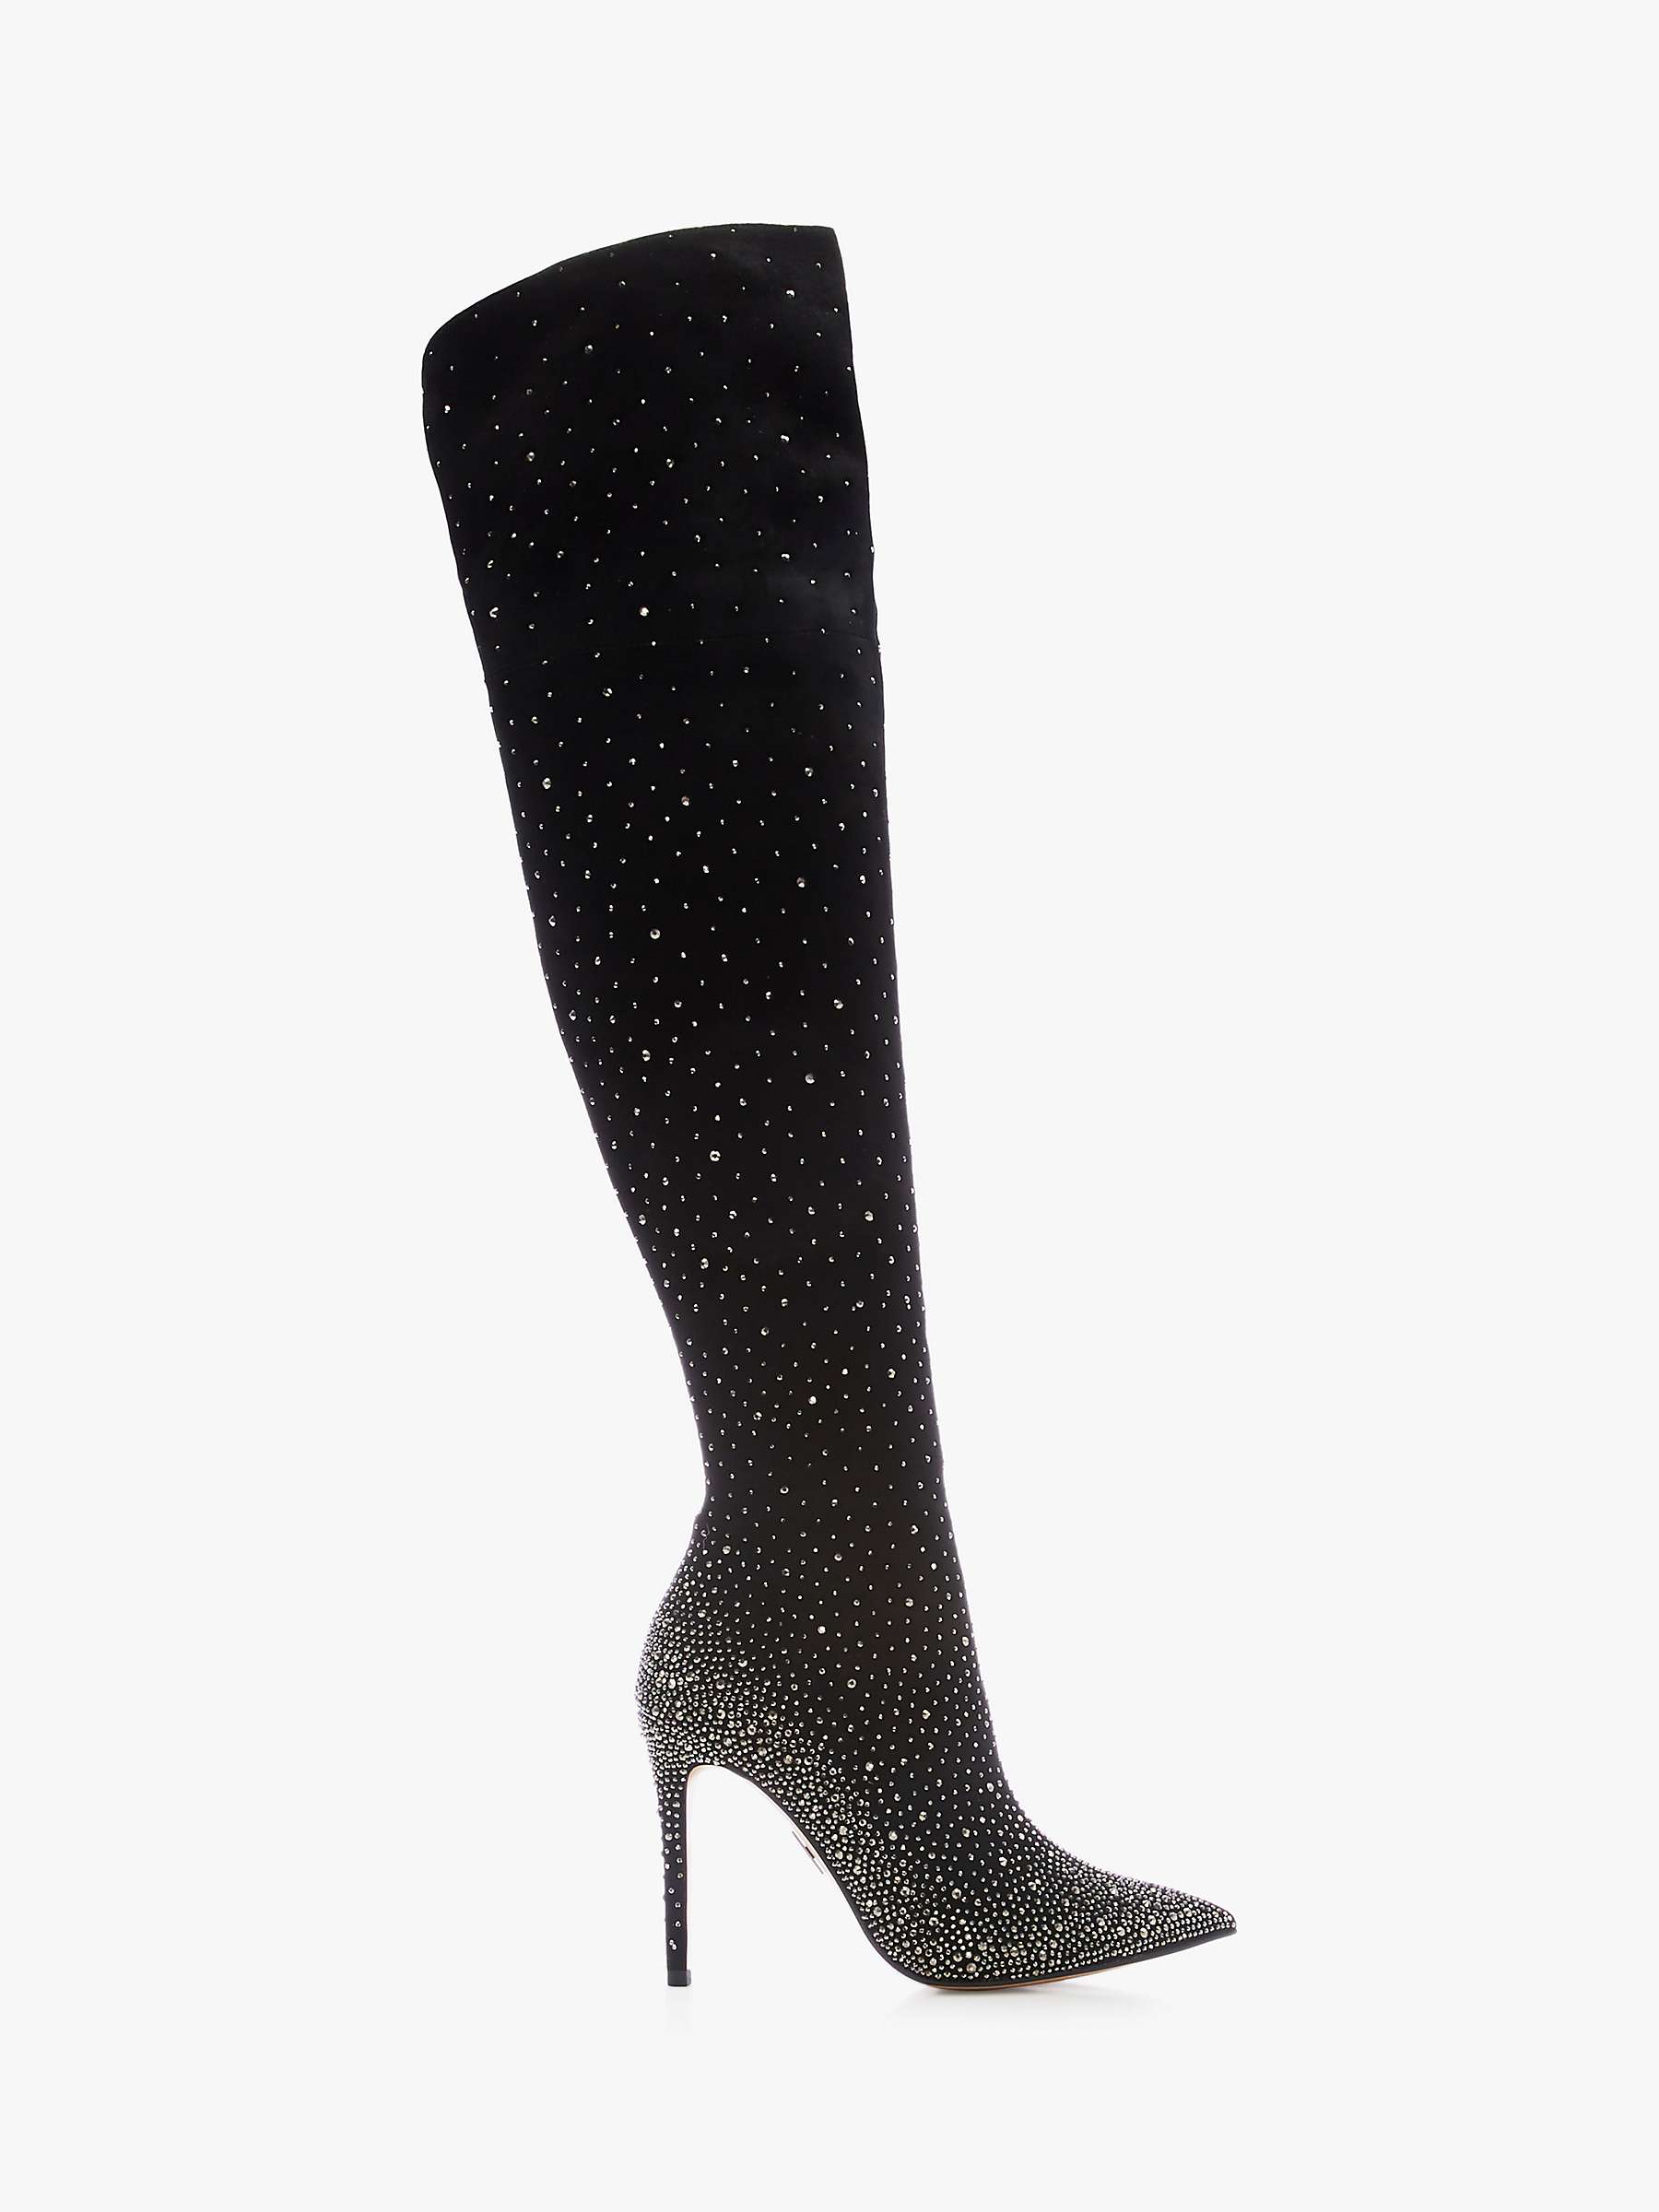 Buy Moda in Pelle Yesenia Suede Diamante Embellished Over The Knee Boots, Black Online at johnlewis.com